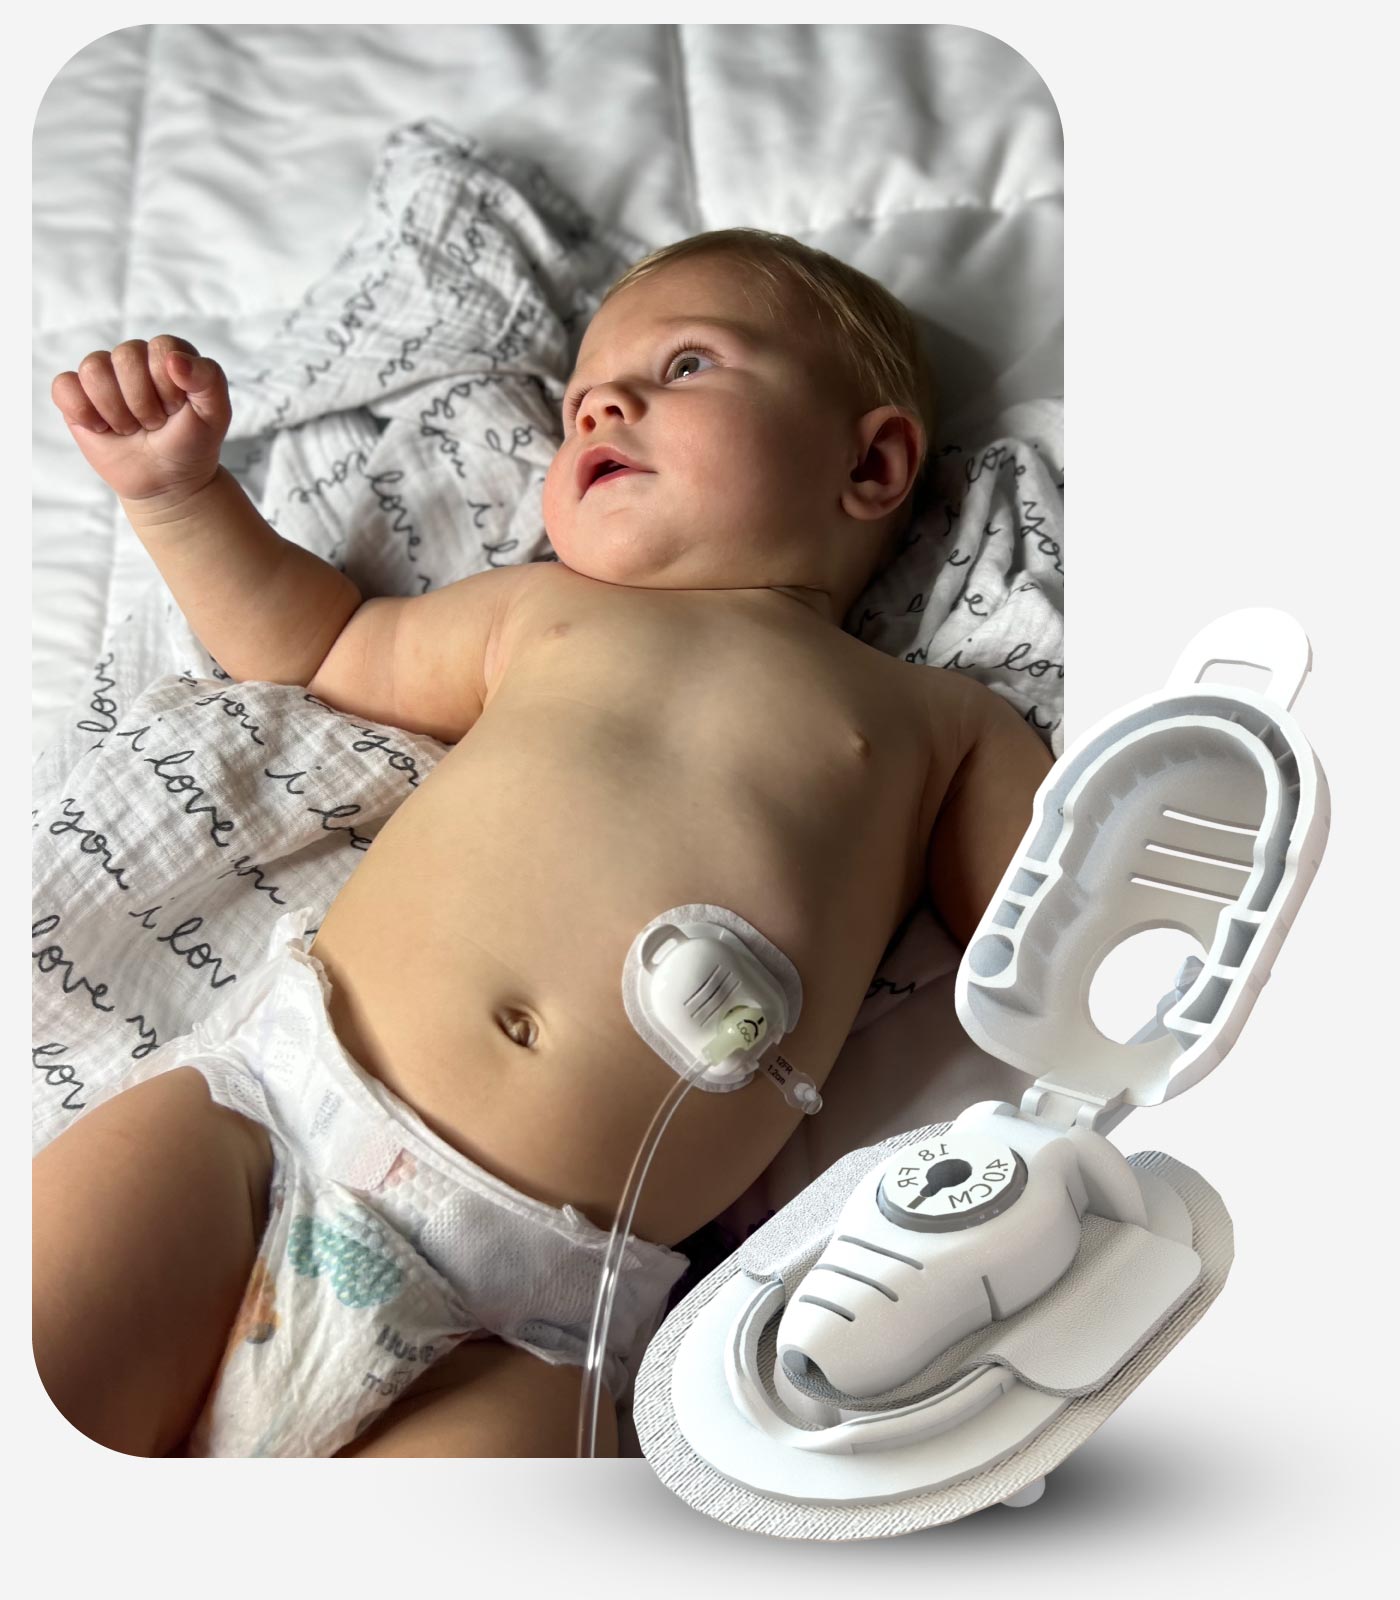 Button Huggie G-button Securement device on a pediatric patient with feeding tube attached